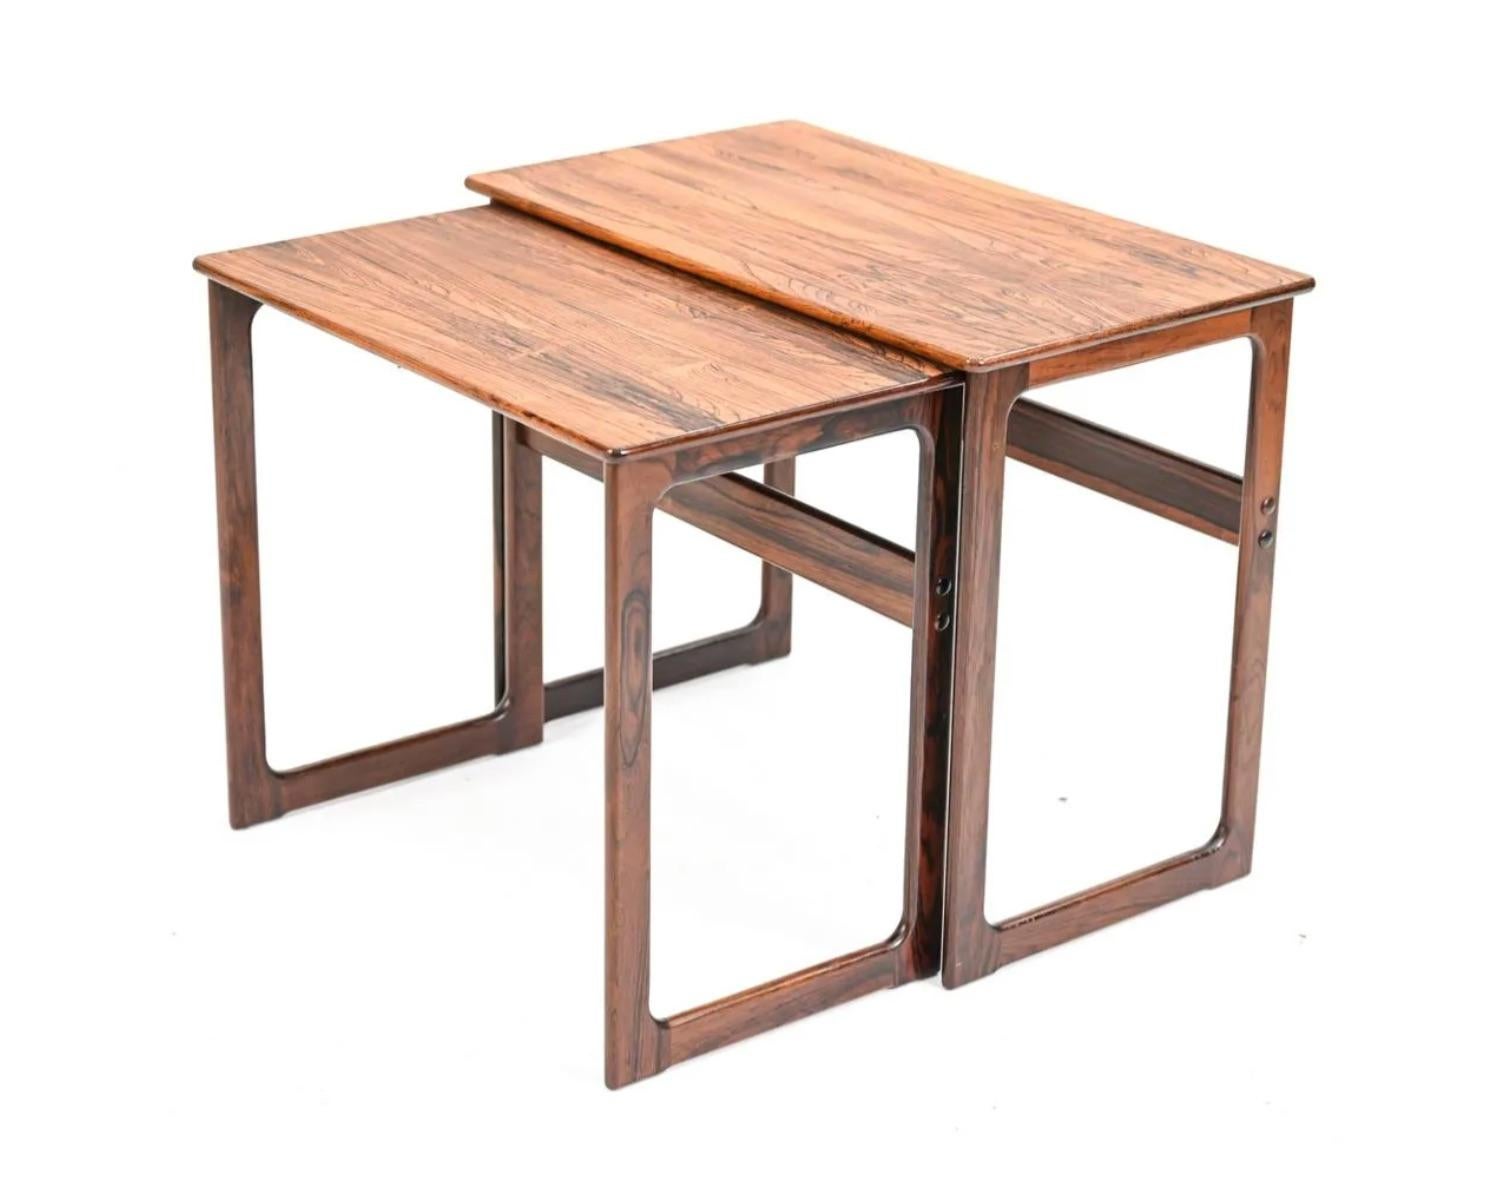 Beautiful mid-century rosewood nesting tables. No label. 
Dimensions of larger table are H 20.5